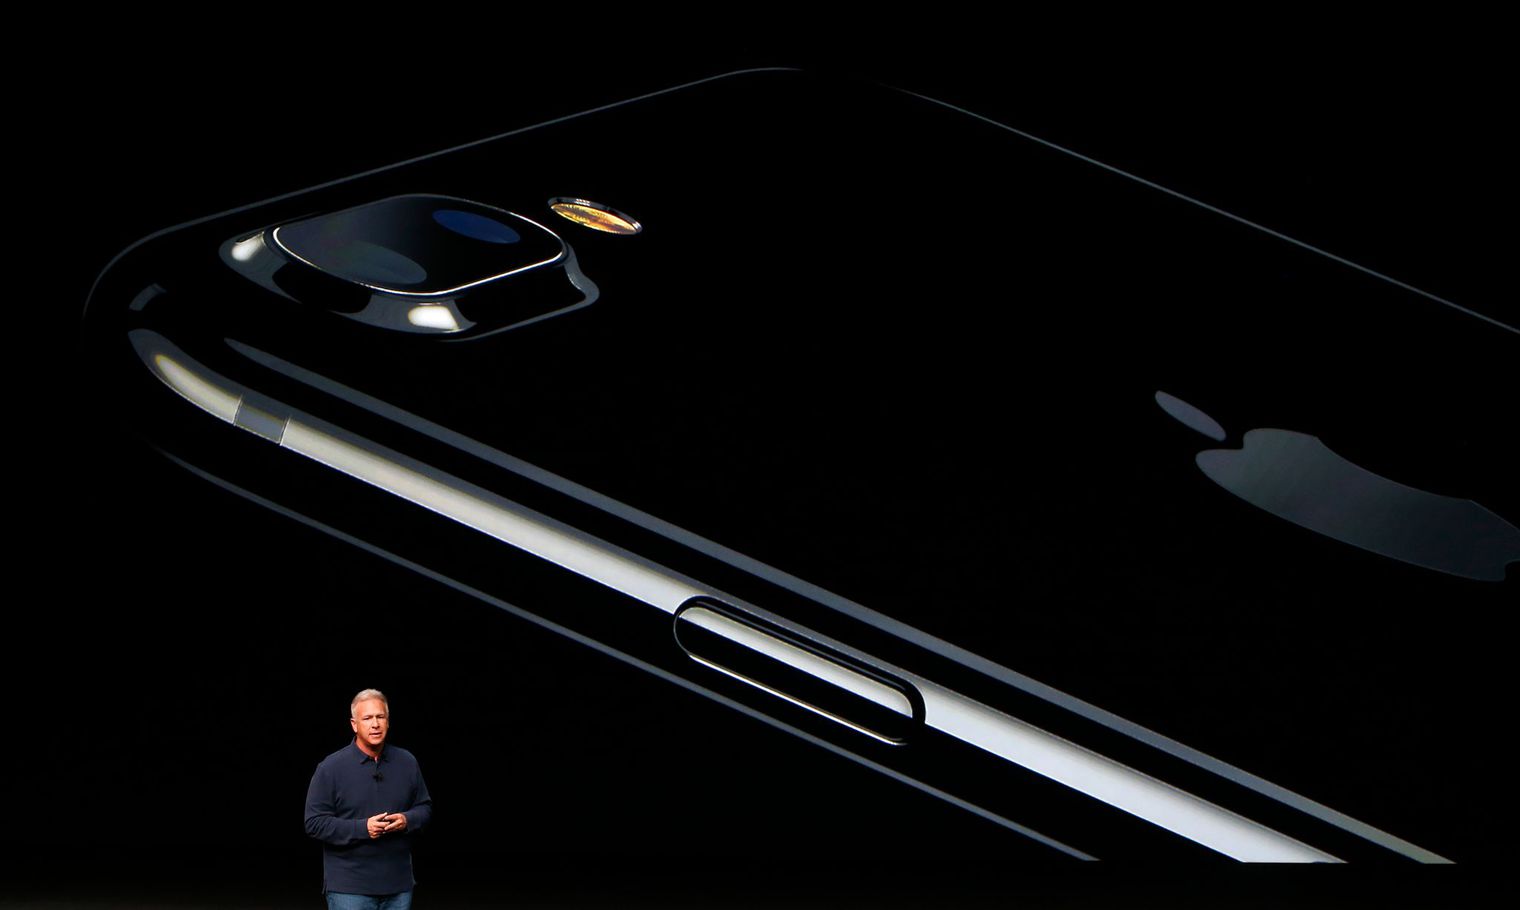 phil schiller discusses the iphone 7 during a media event in san francisco